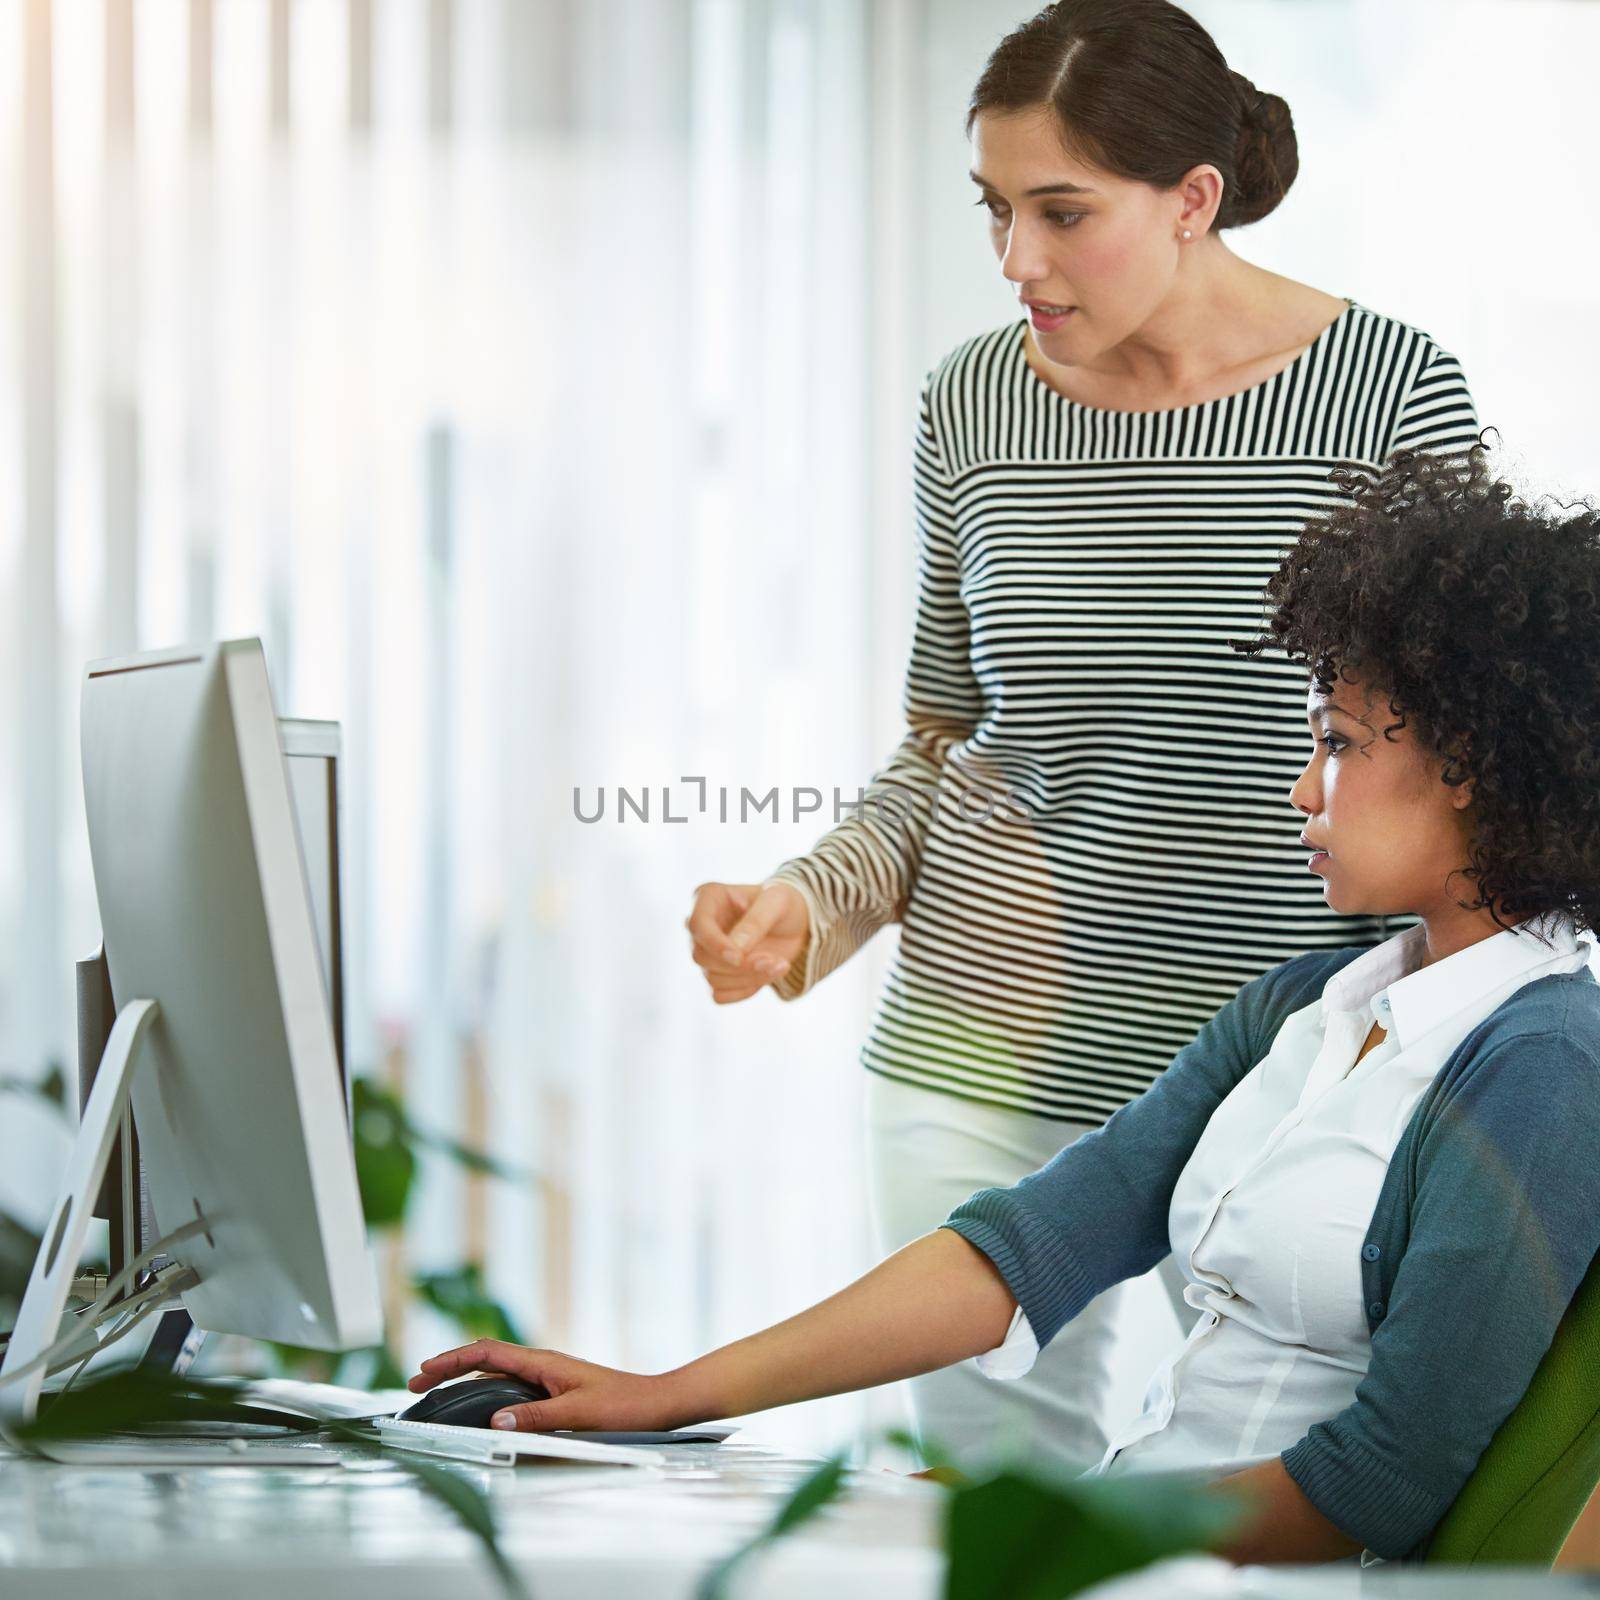 A training manager talking about online collaboration project with intern assistant looking on a desktop monitor screen. Business woman discussing latest social media strategy or analyzing seo trends.